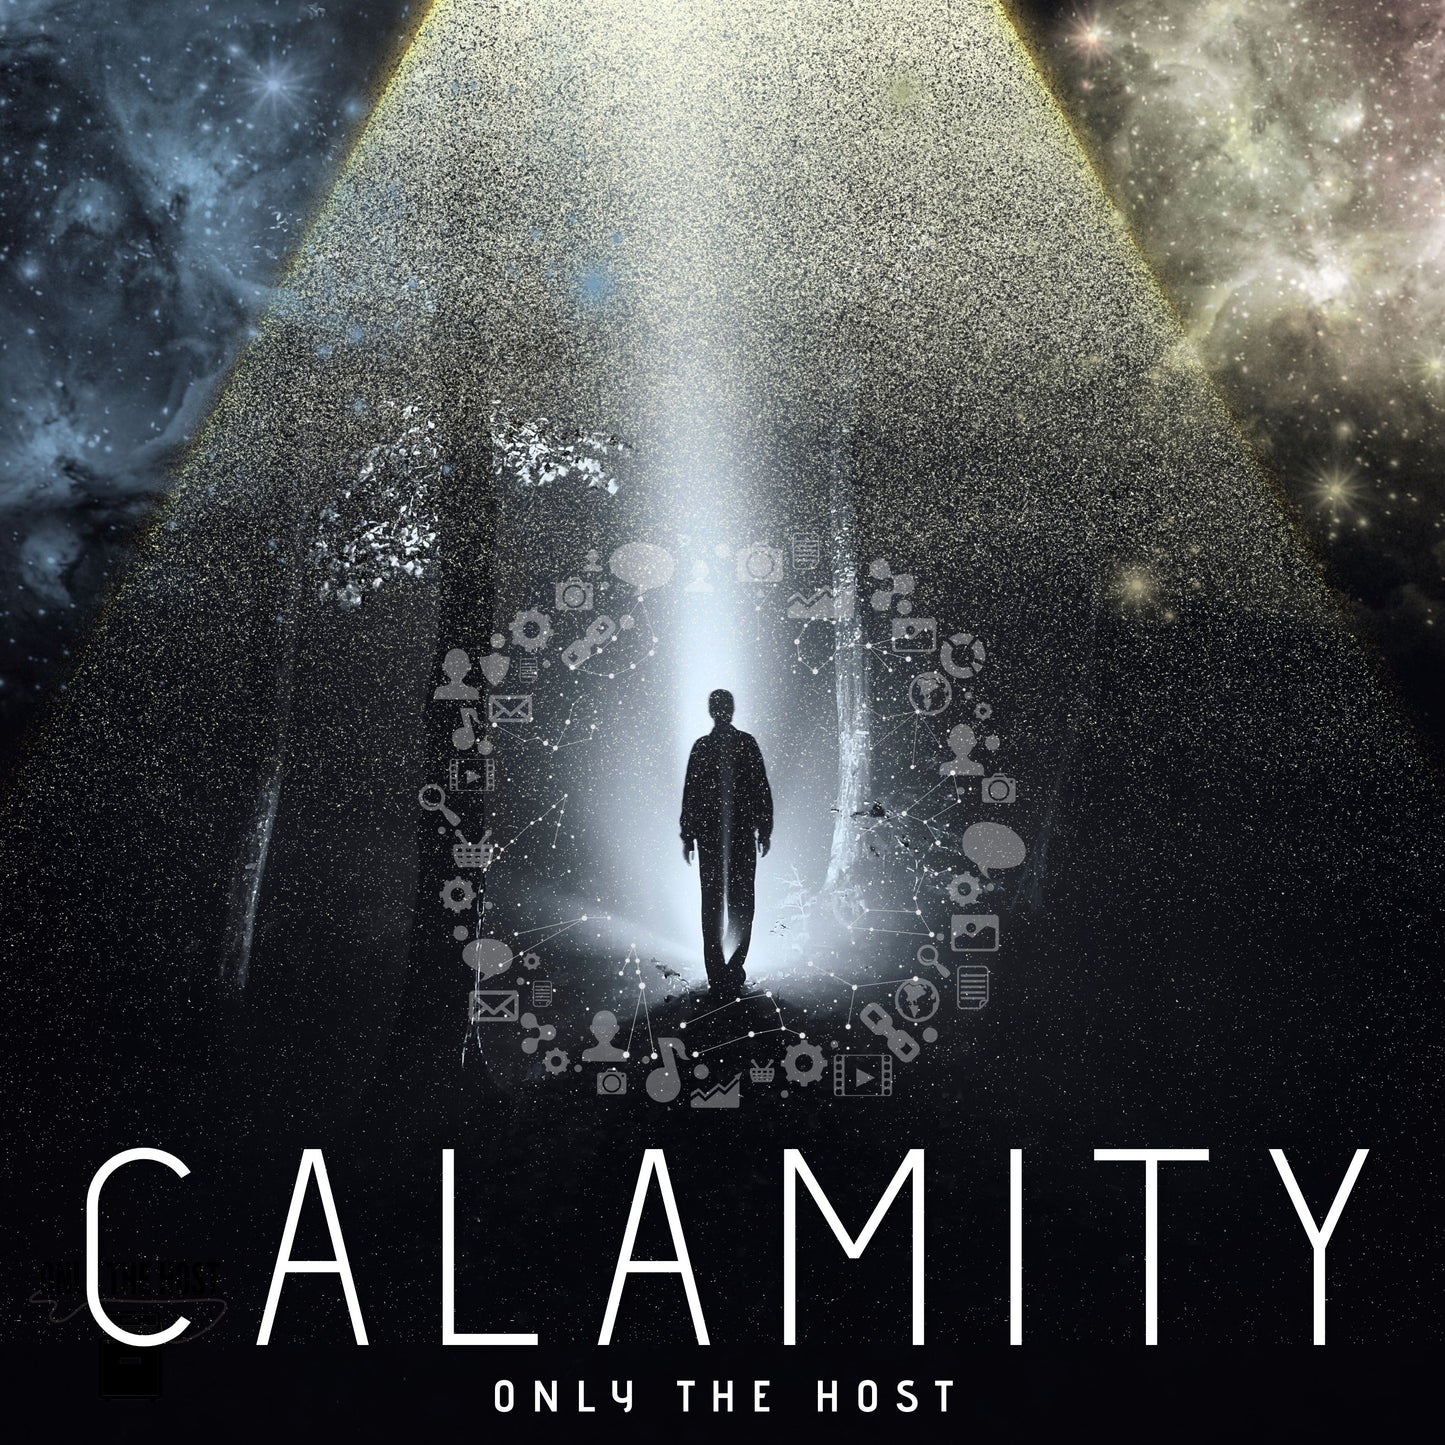 Only the Host - Calamity (Compact Disc)